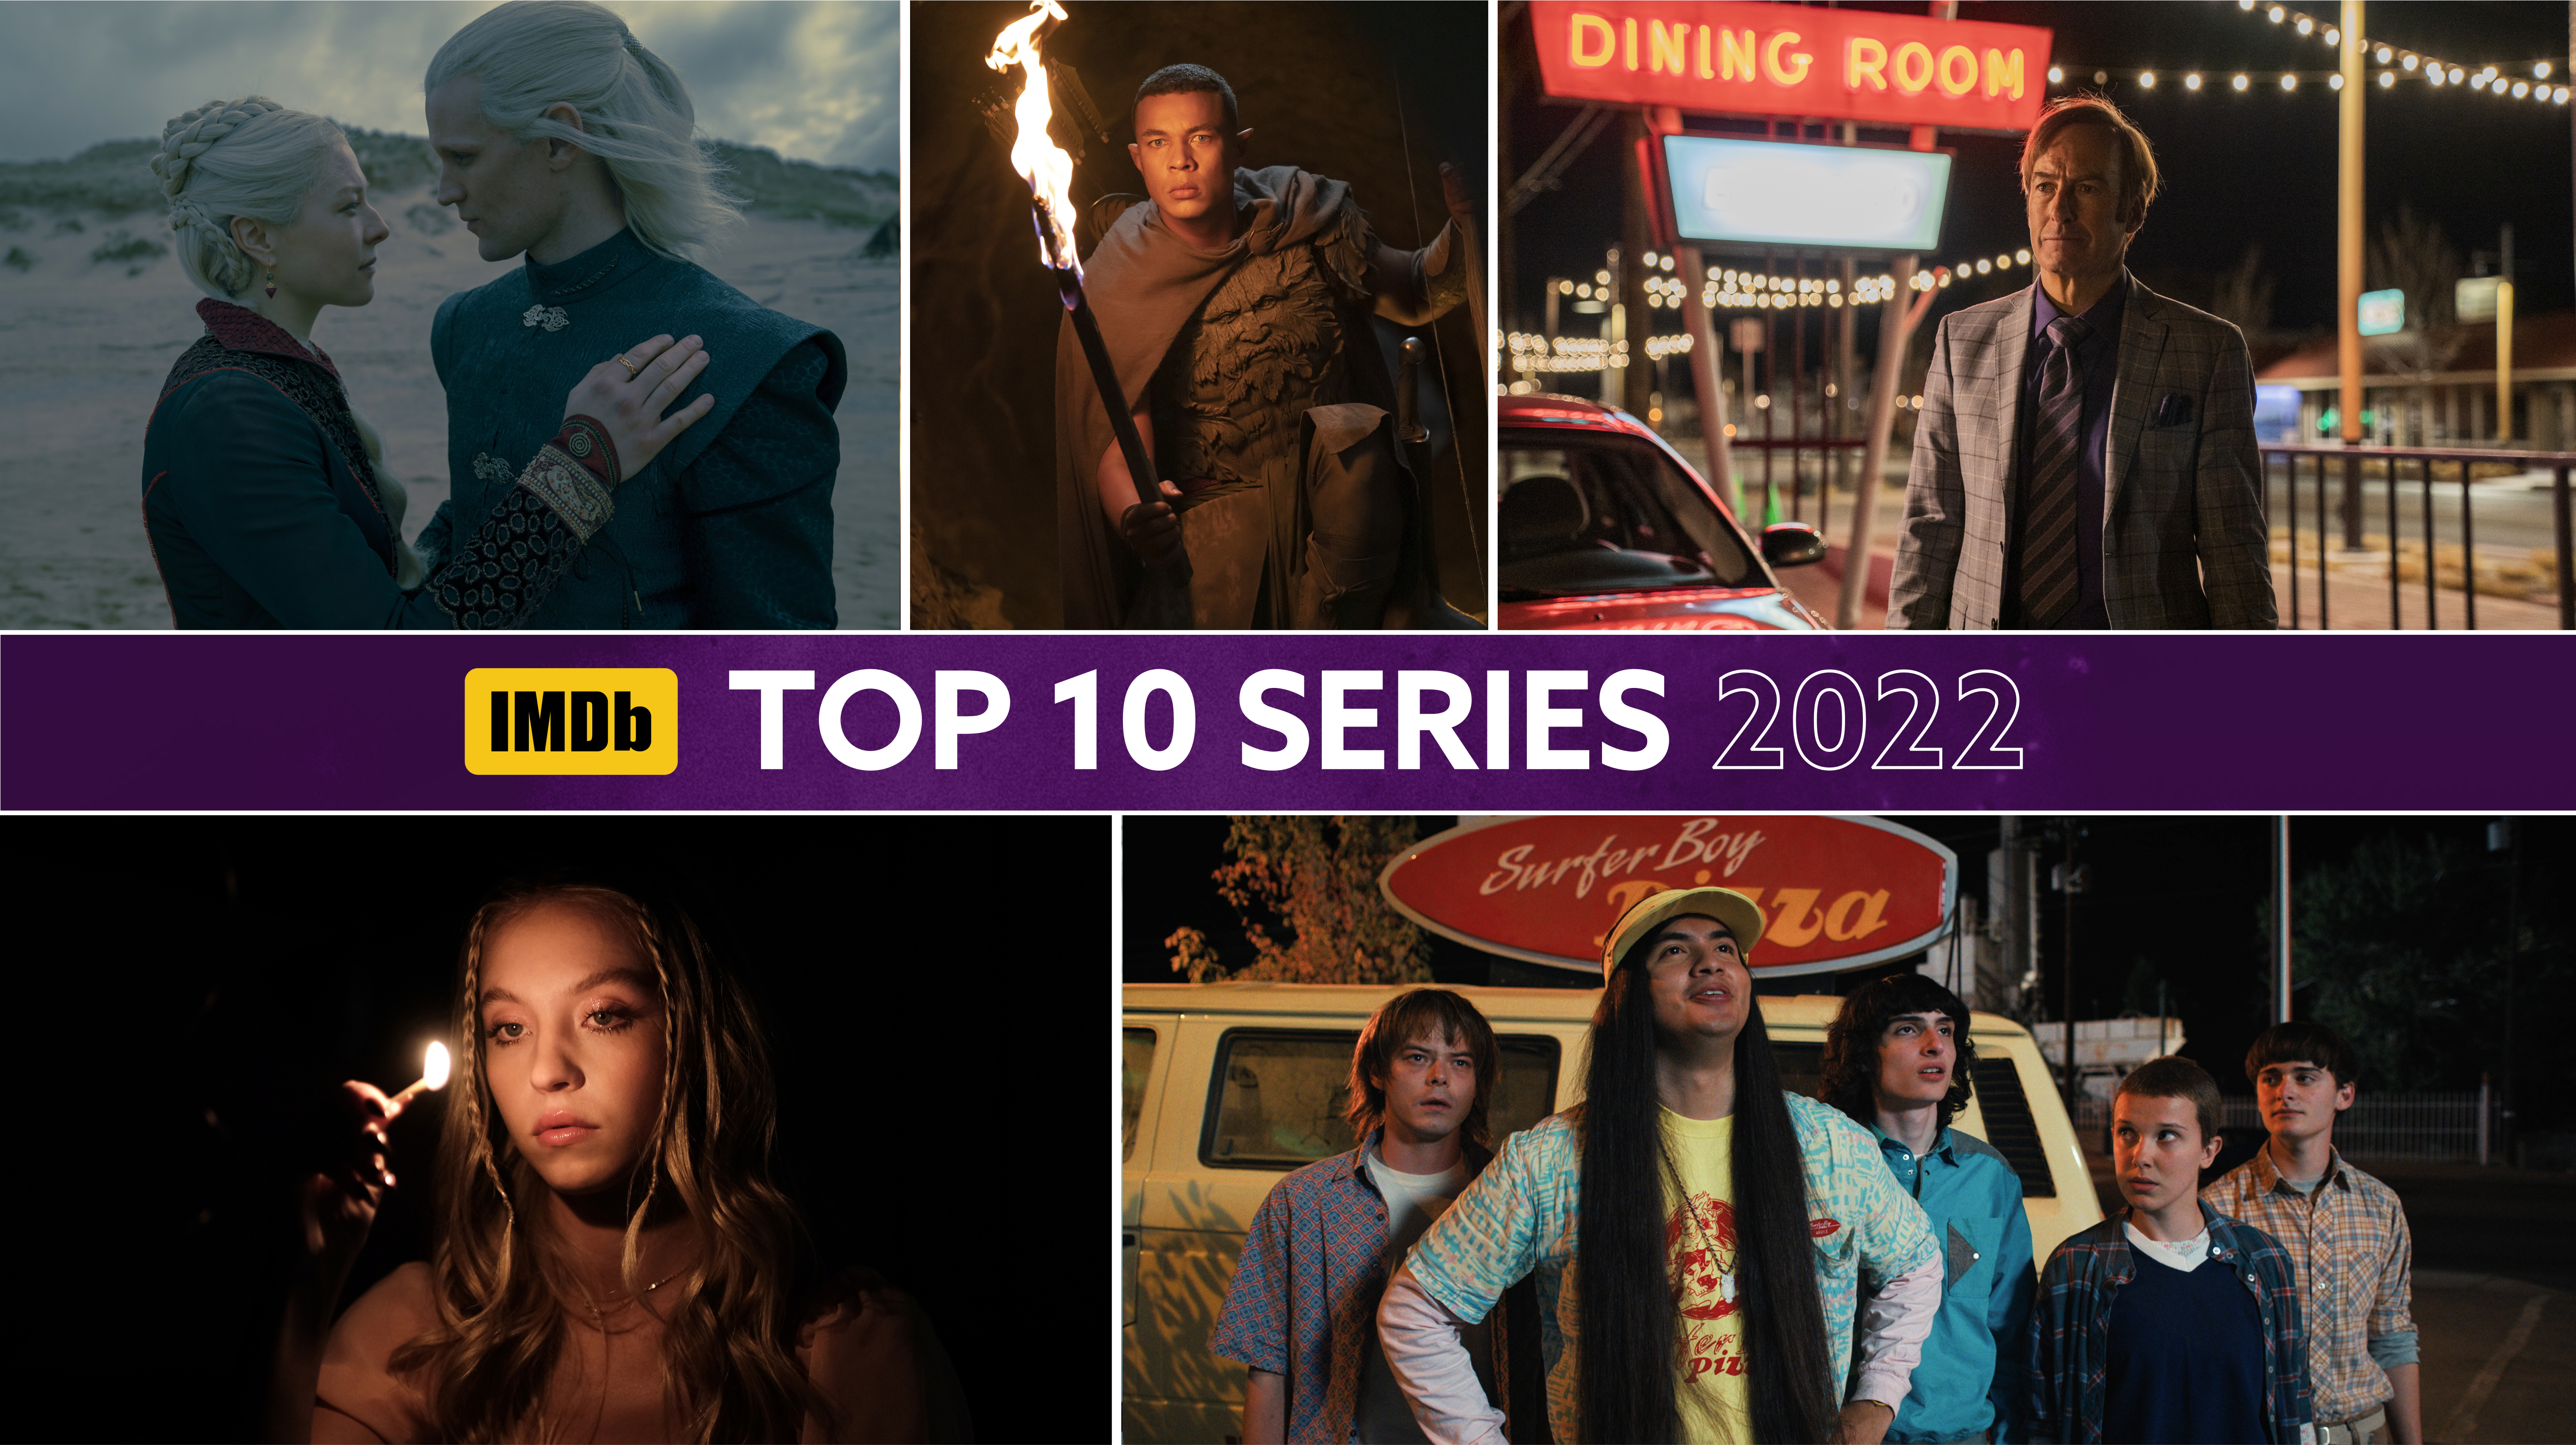 Imdb Best Tv Shows IMDb Announces Top 10 Movies and Series of 2022 | Business Wire